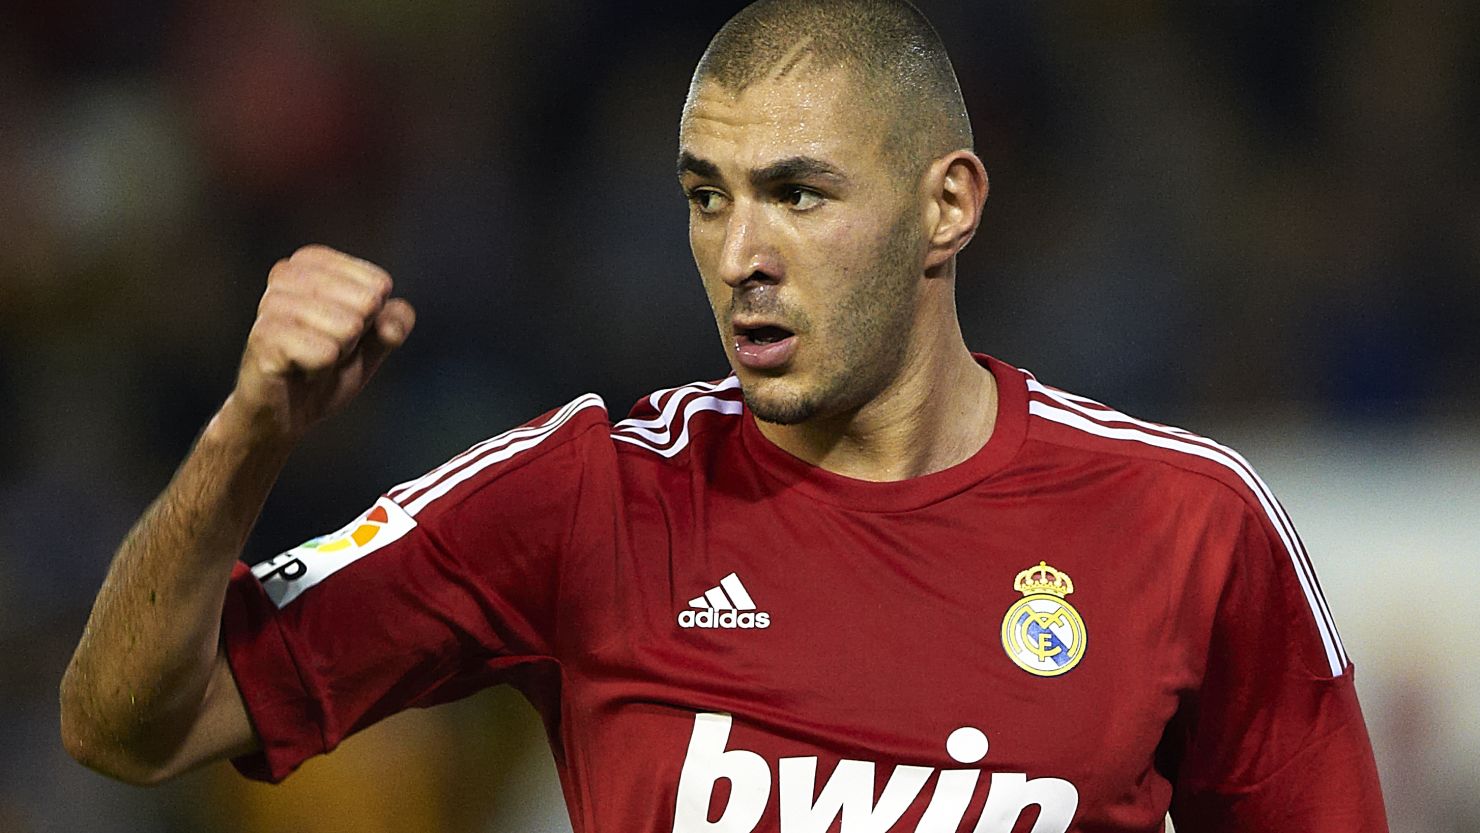 Karim Benzema scored the only goal as Real Madrid beat Malaga 1-0 in the Spanish Cup.